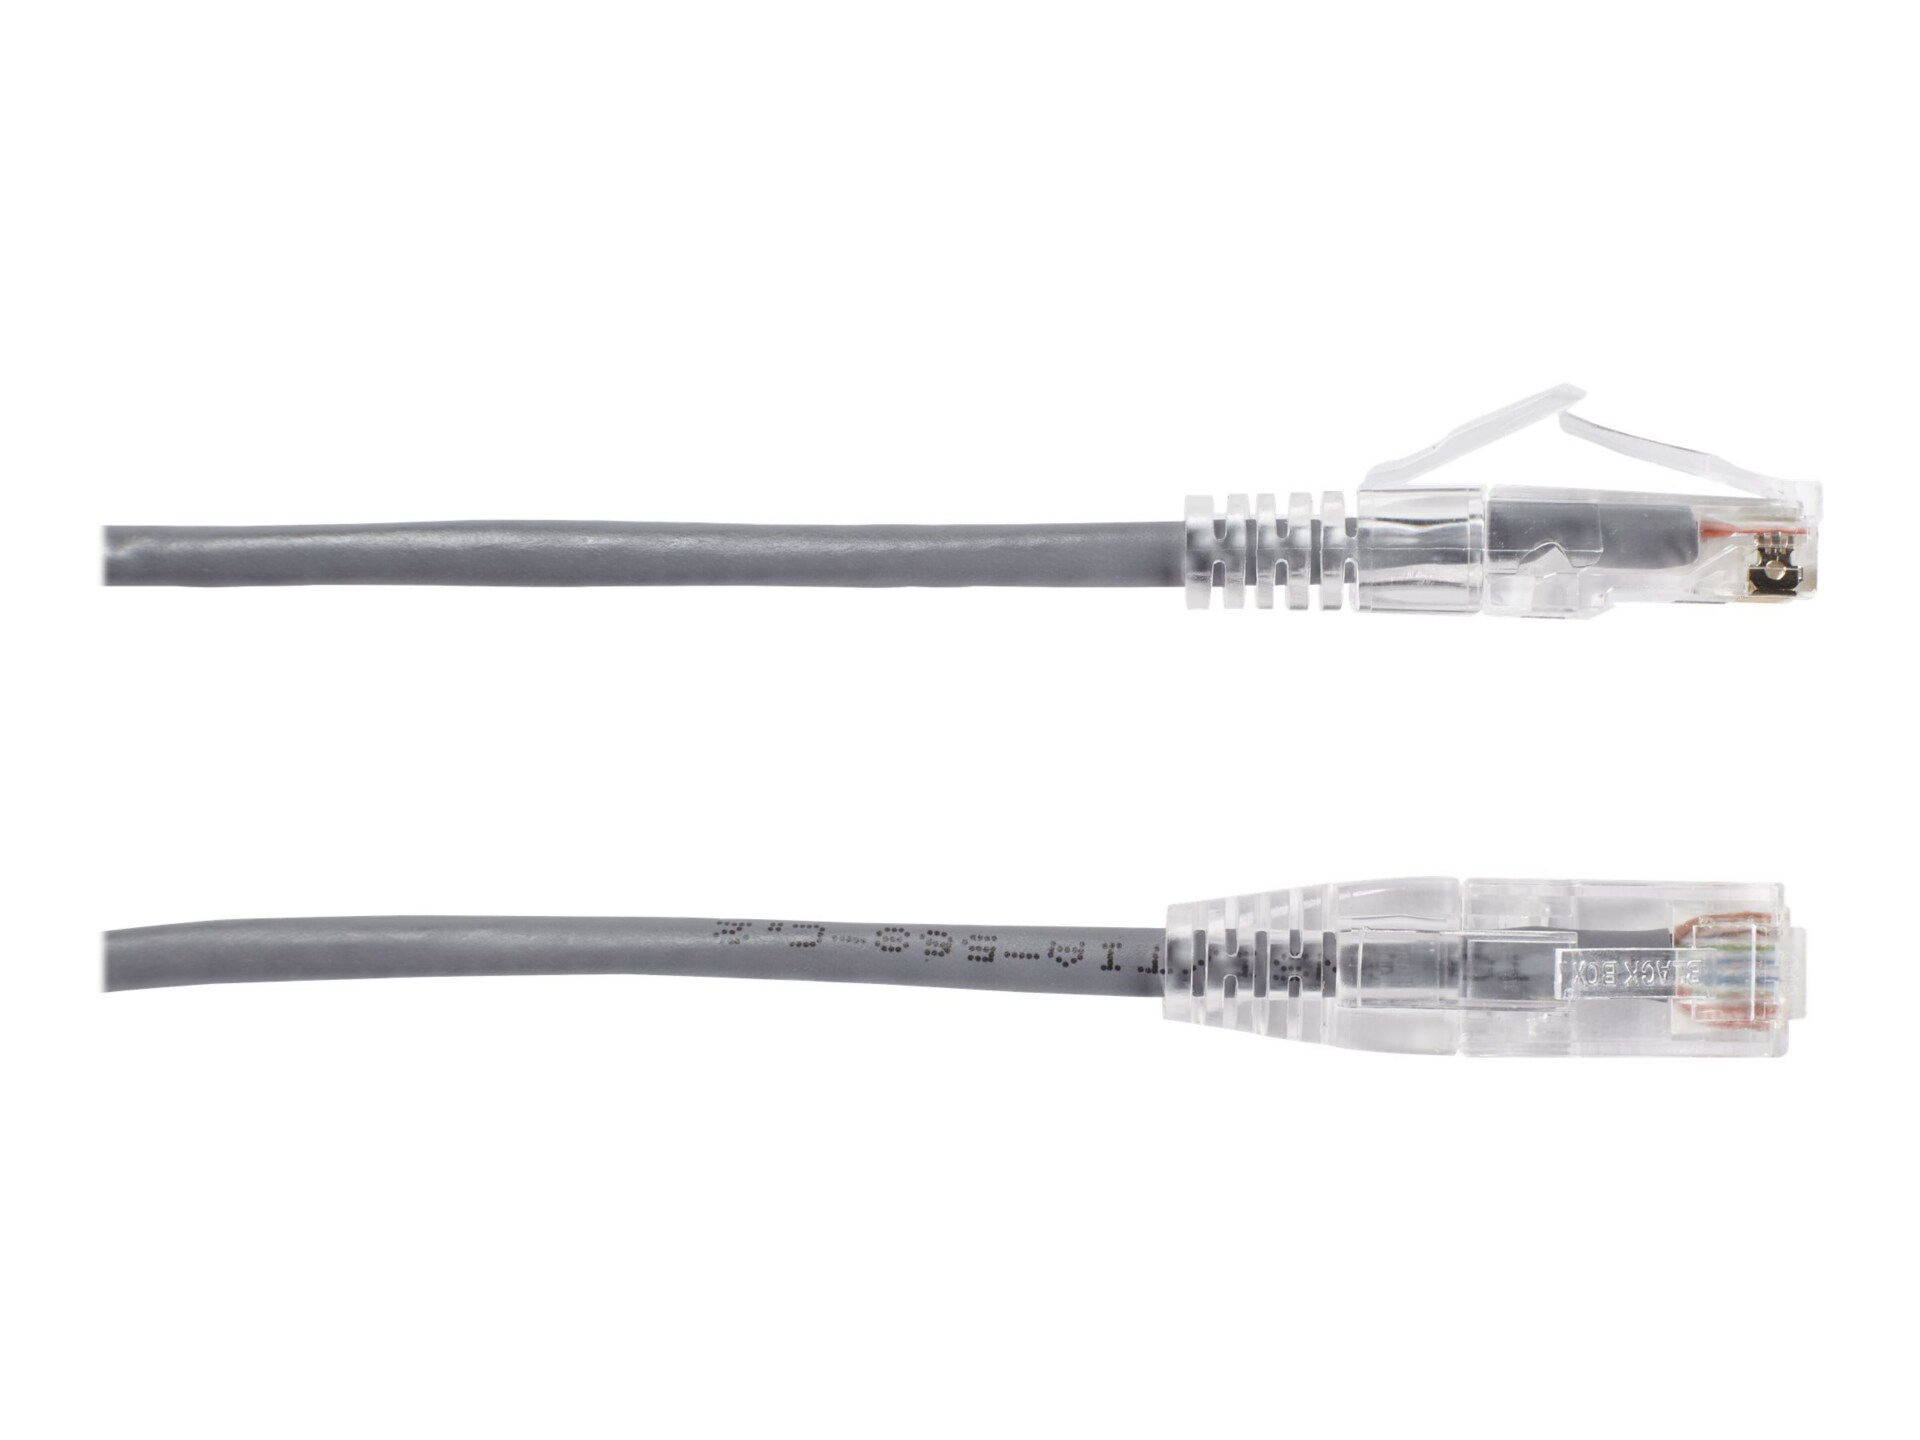 Black Box Slim-Net patch cable - 3 ft - gray